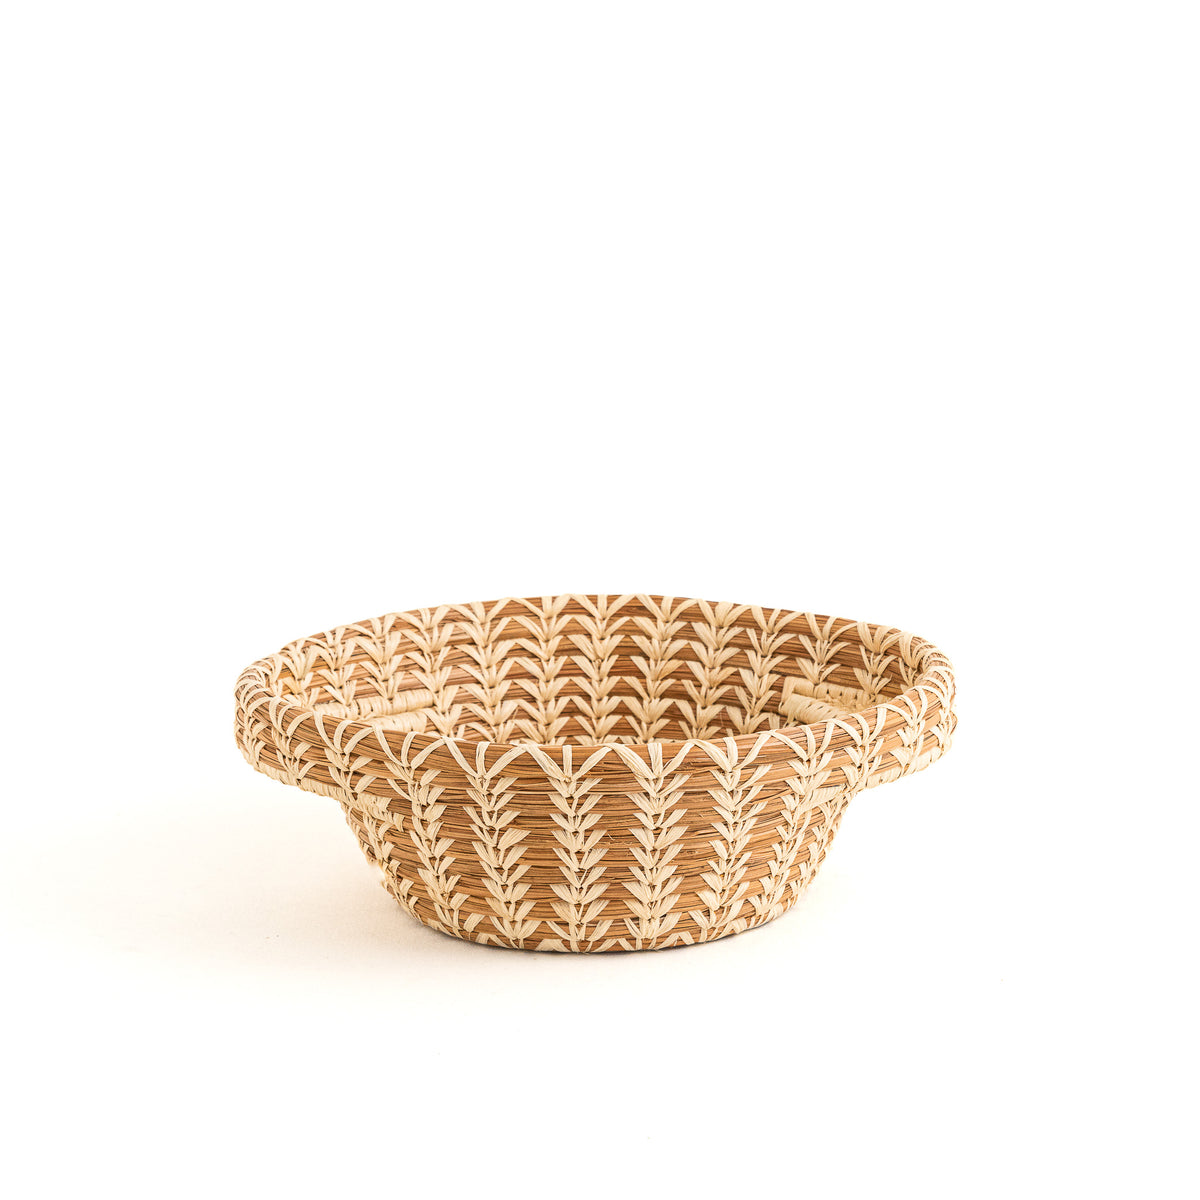 Small Pine Needle Basket with Lacy Handles side view